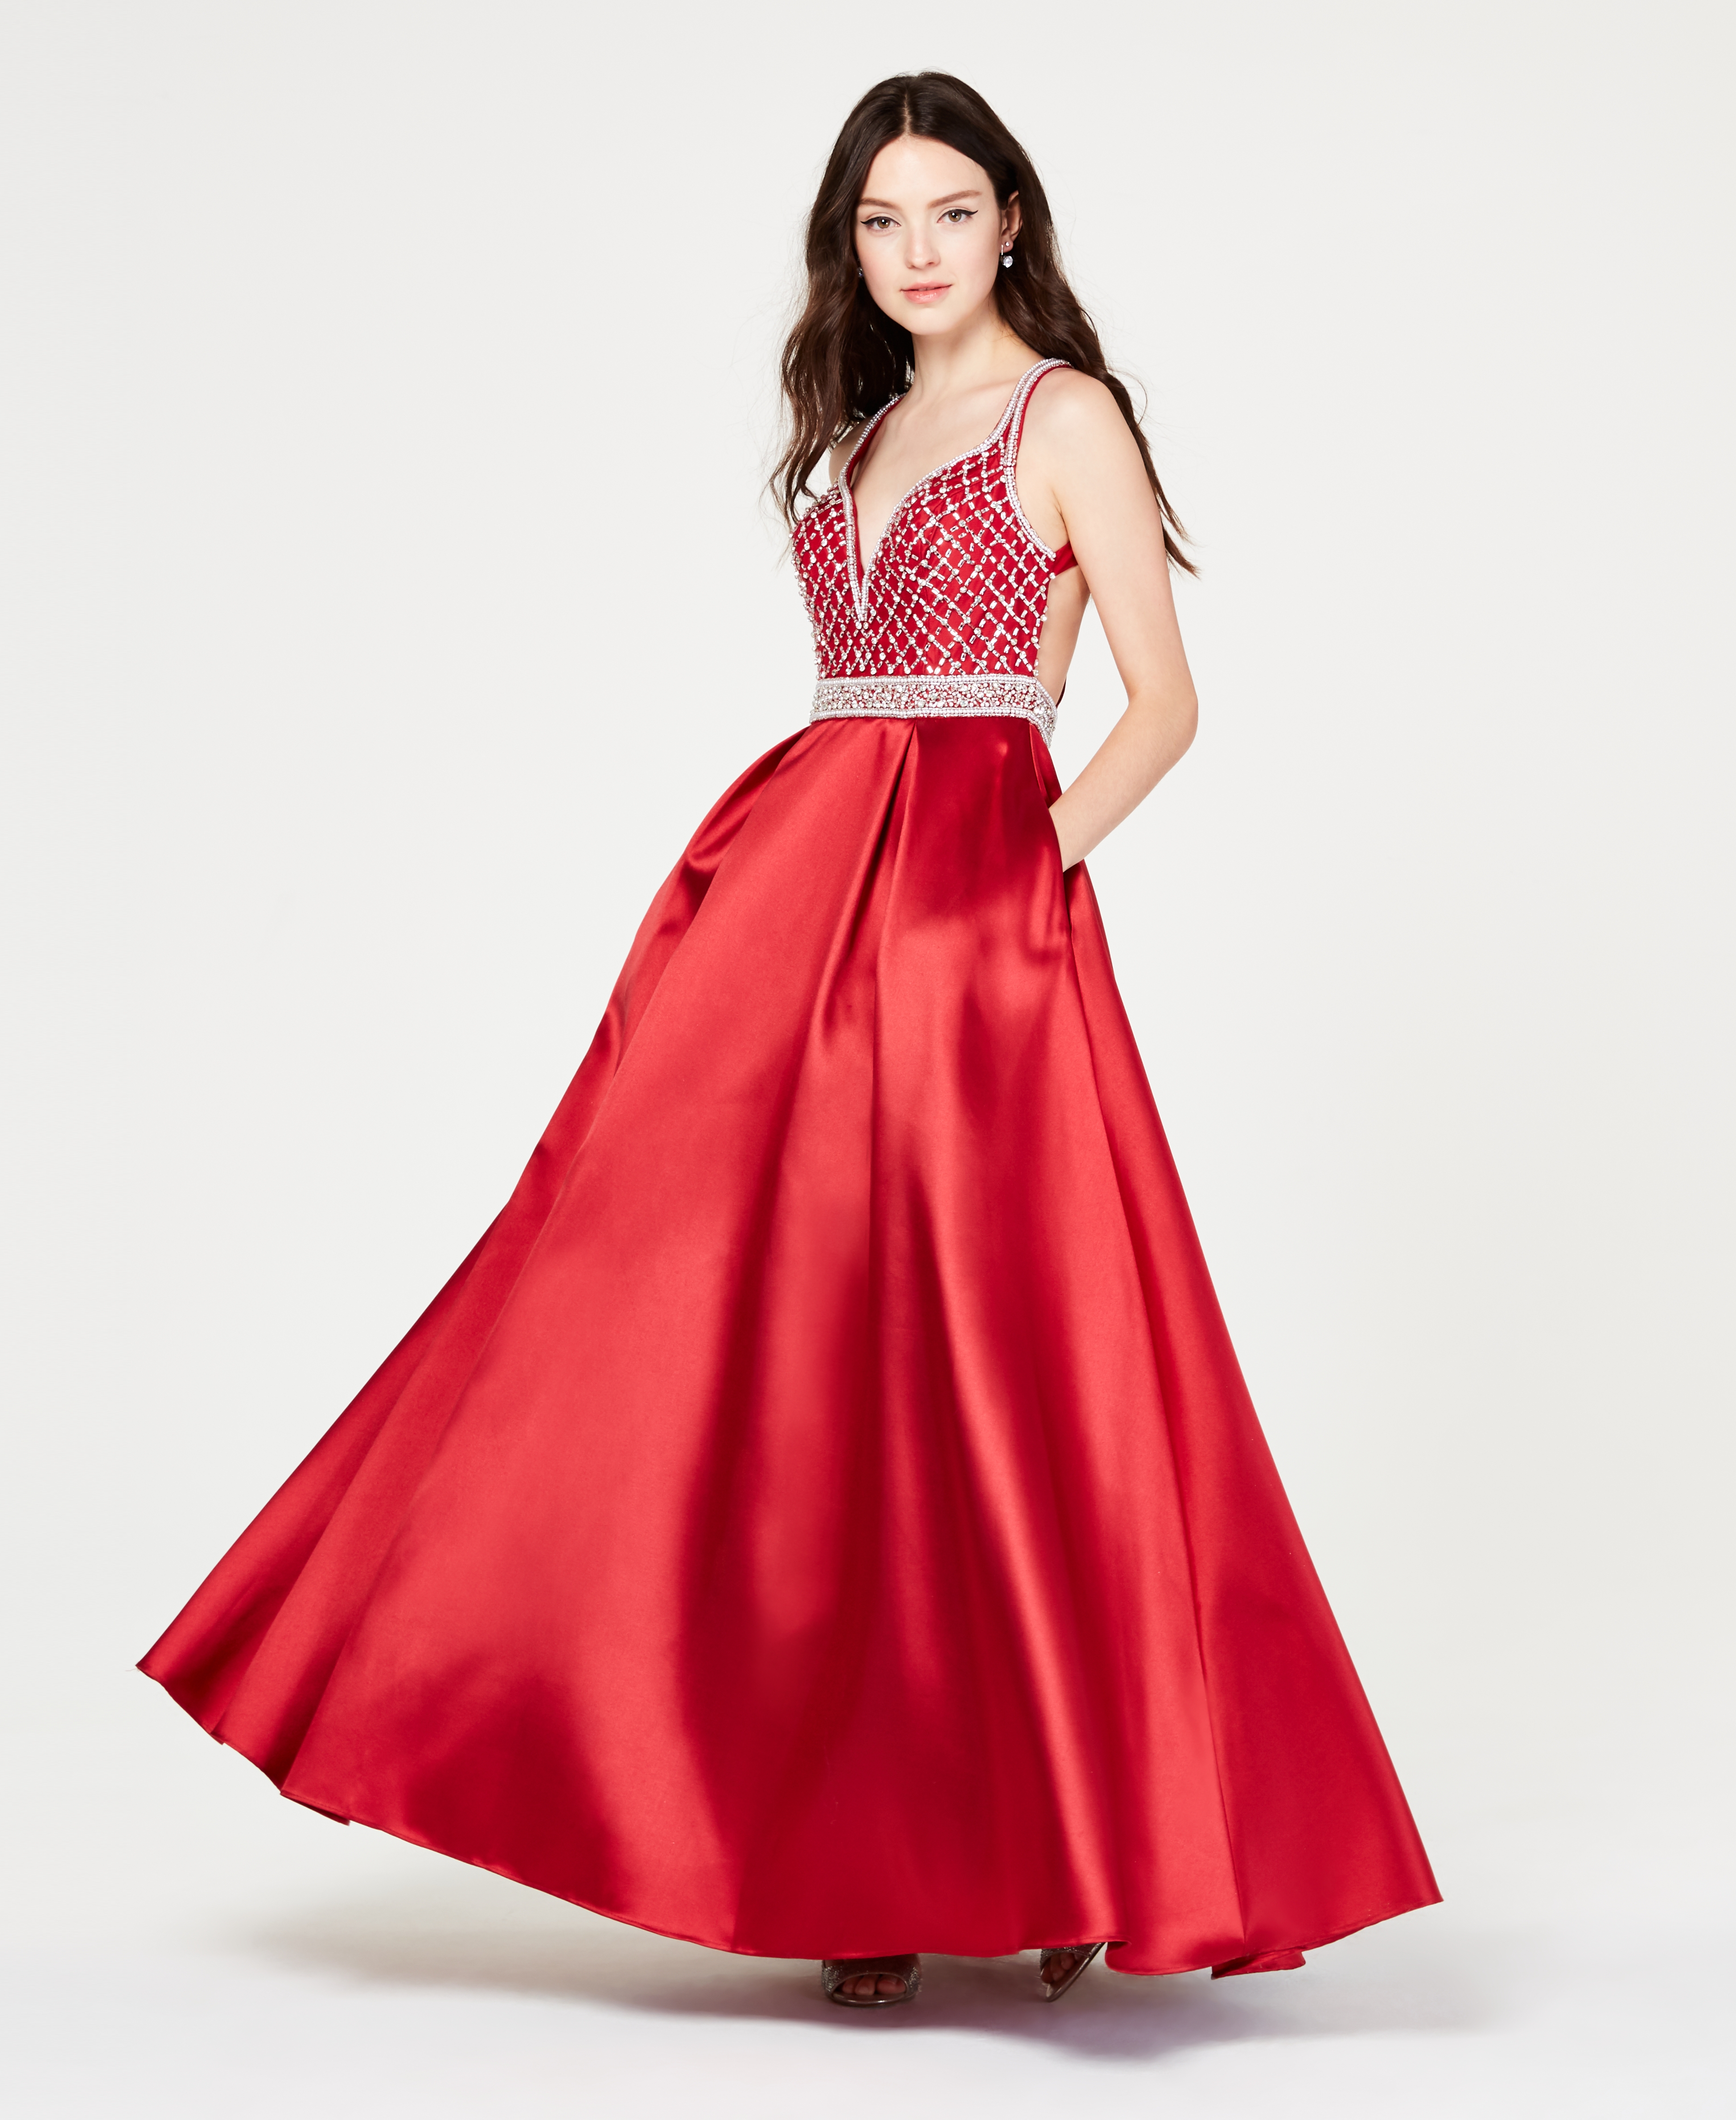 Perfect Your Prom Style At Macy S Business Wire